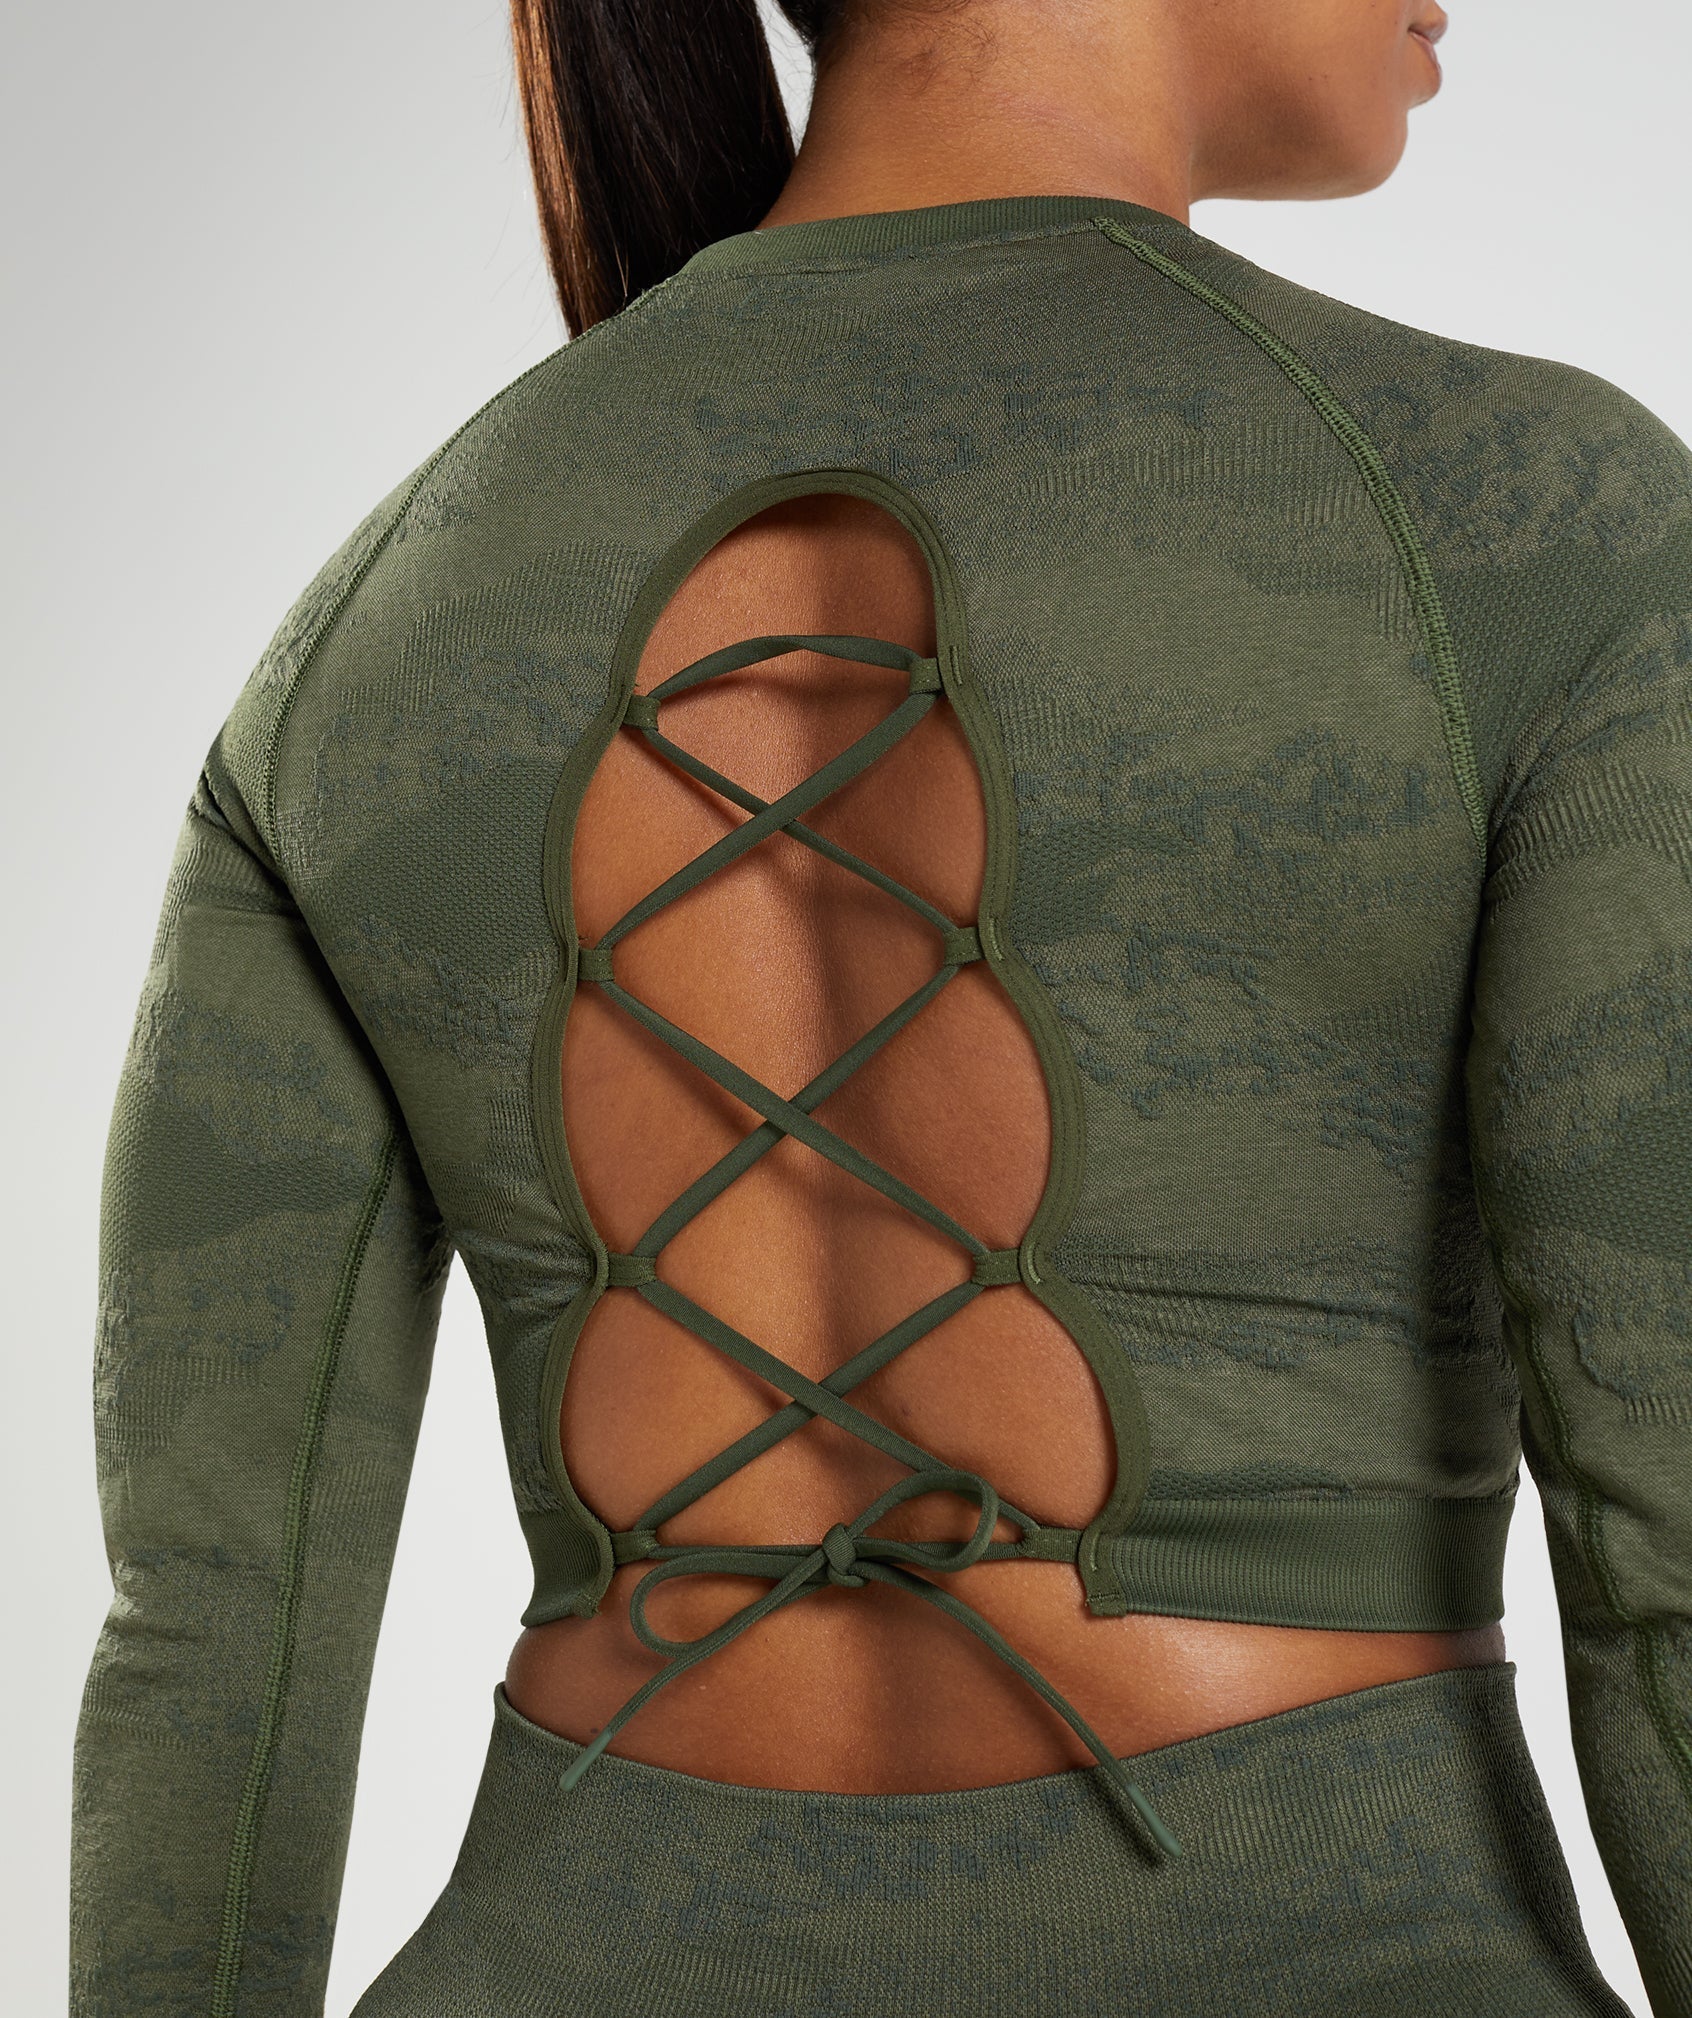 Adapt Camo Seamless Lace Up Back Top in Moss Olive/Core Olive